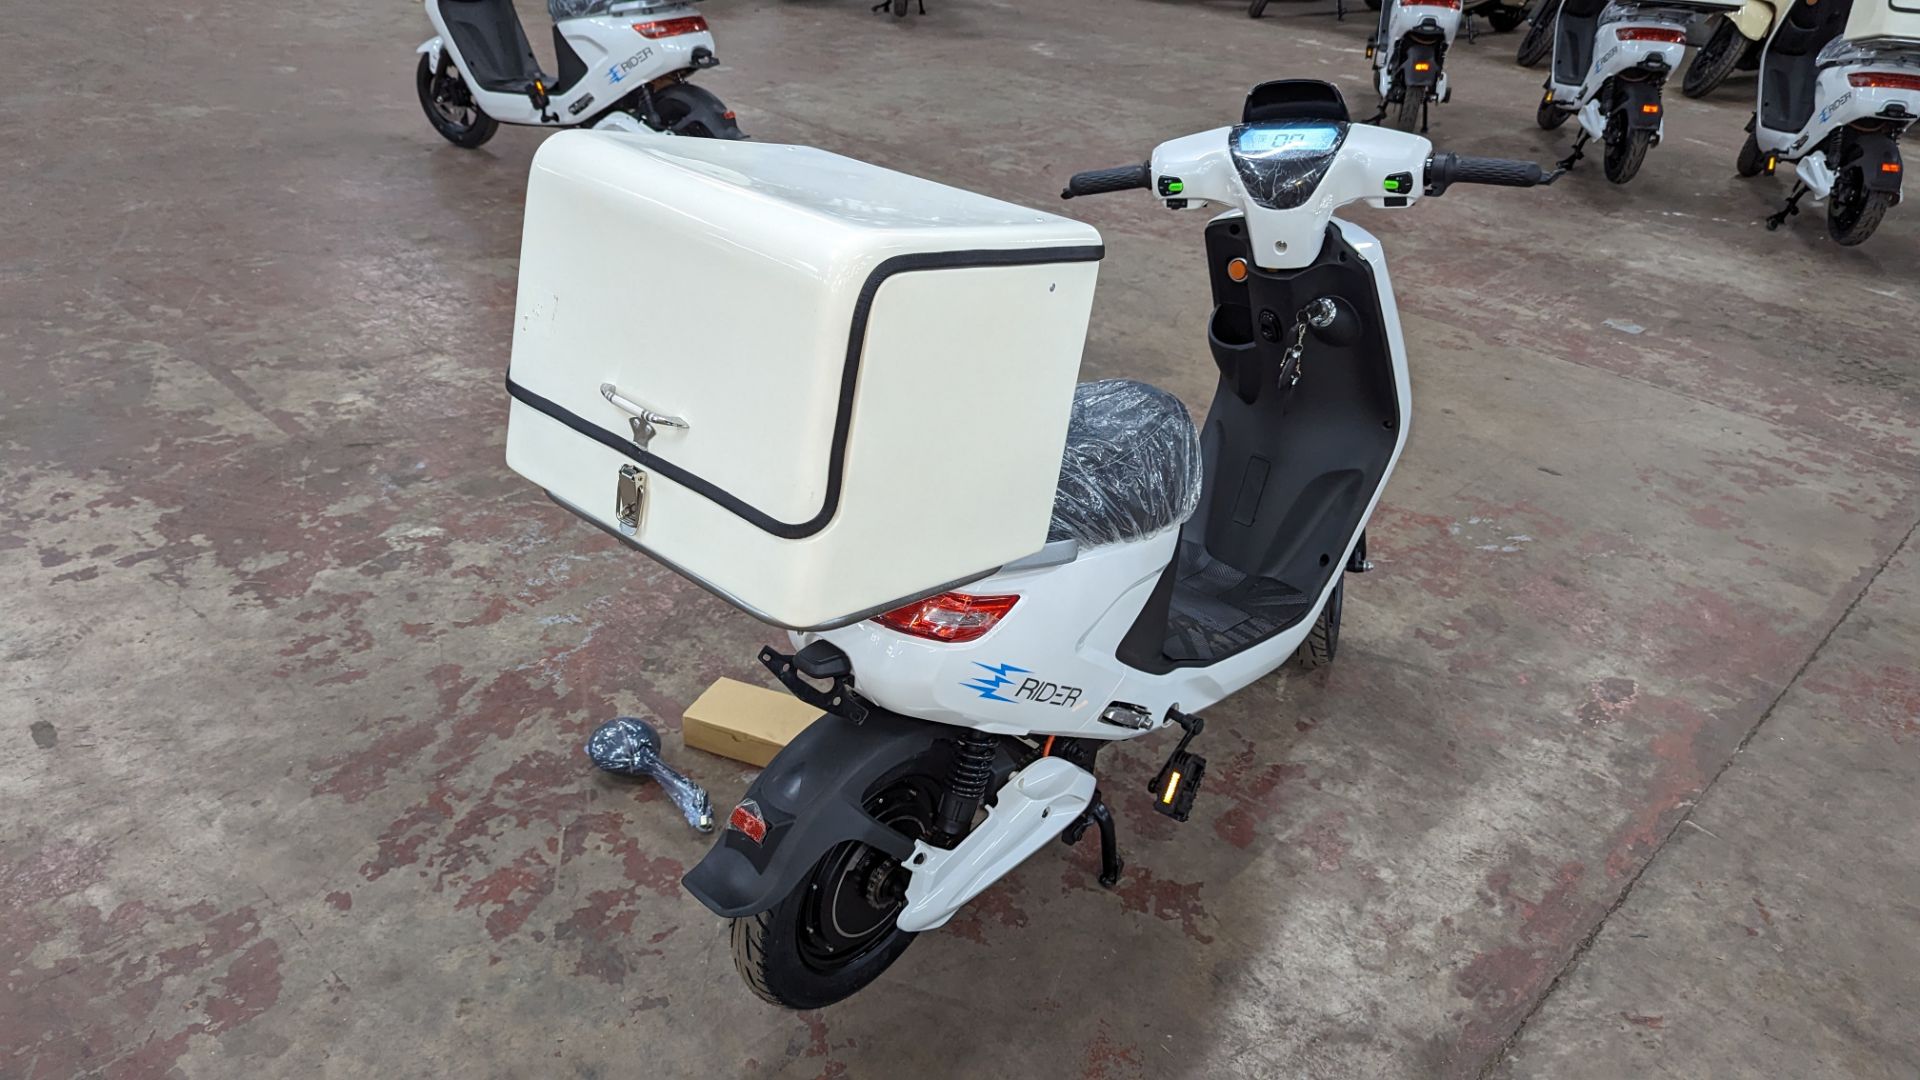 Model 18 Electric Bike: Zero (0) recorded miles, white body with black detailing, insulated box moun - Image 6 of 15